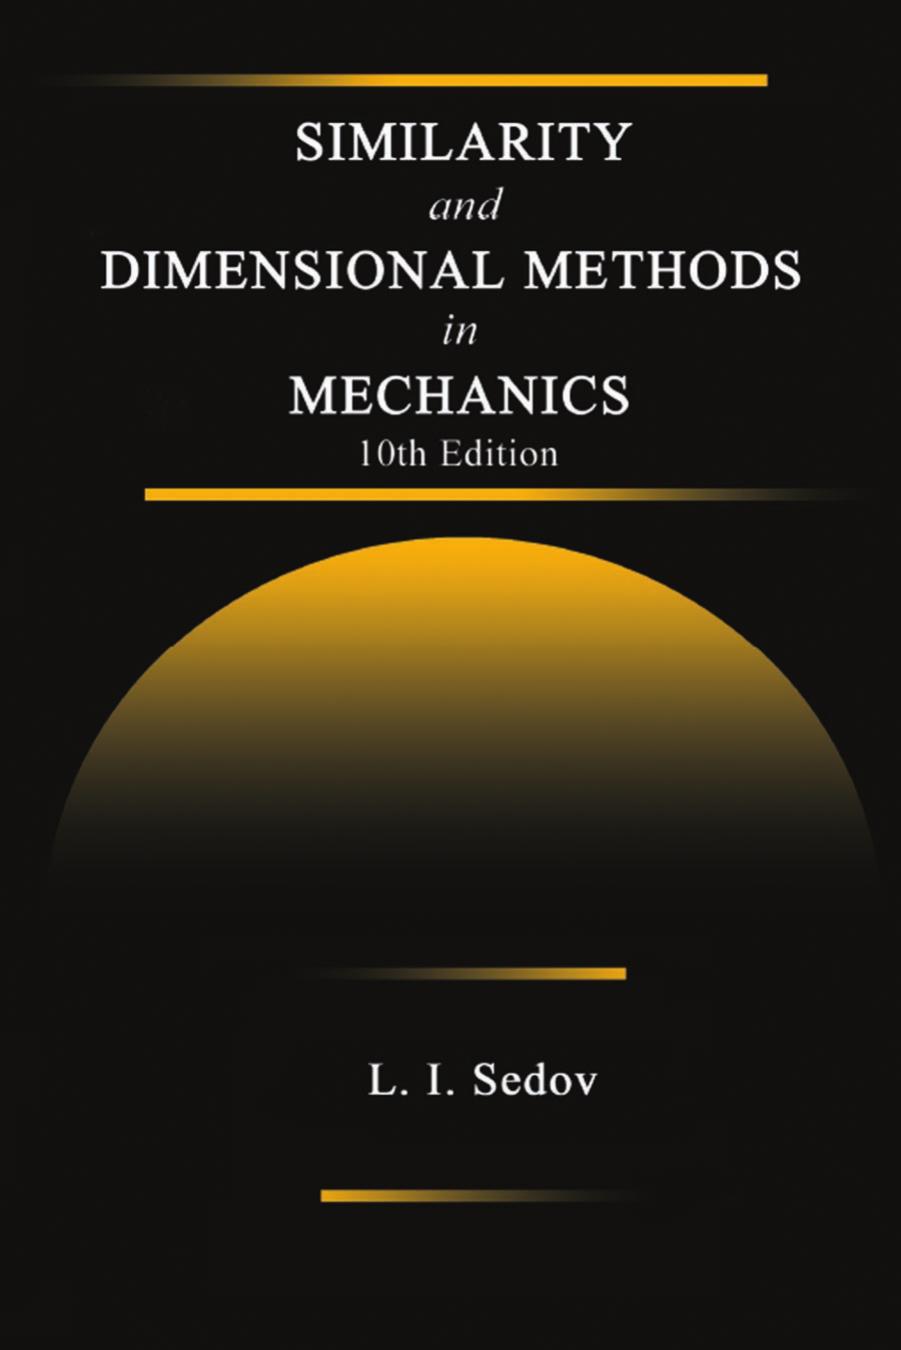 Similarity and Dimensional Methods in Mechanics Edition 10th by L. I. Sedov